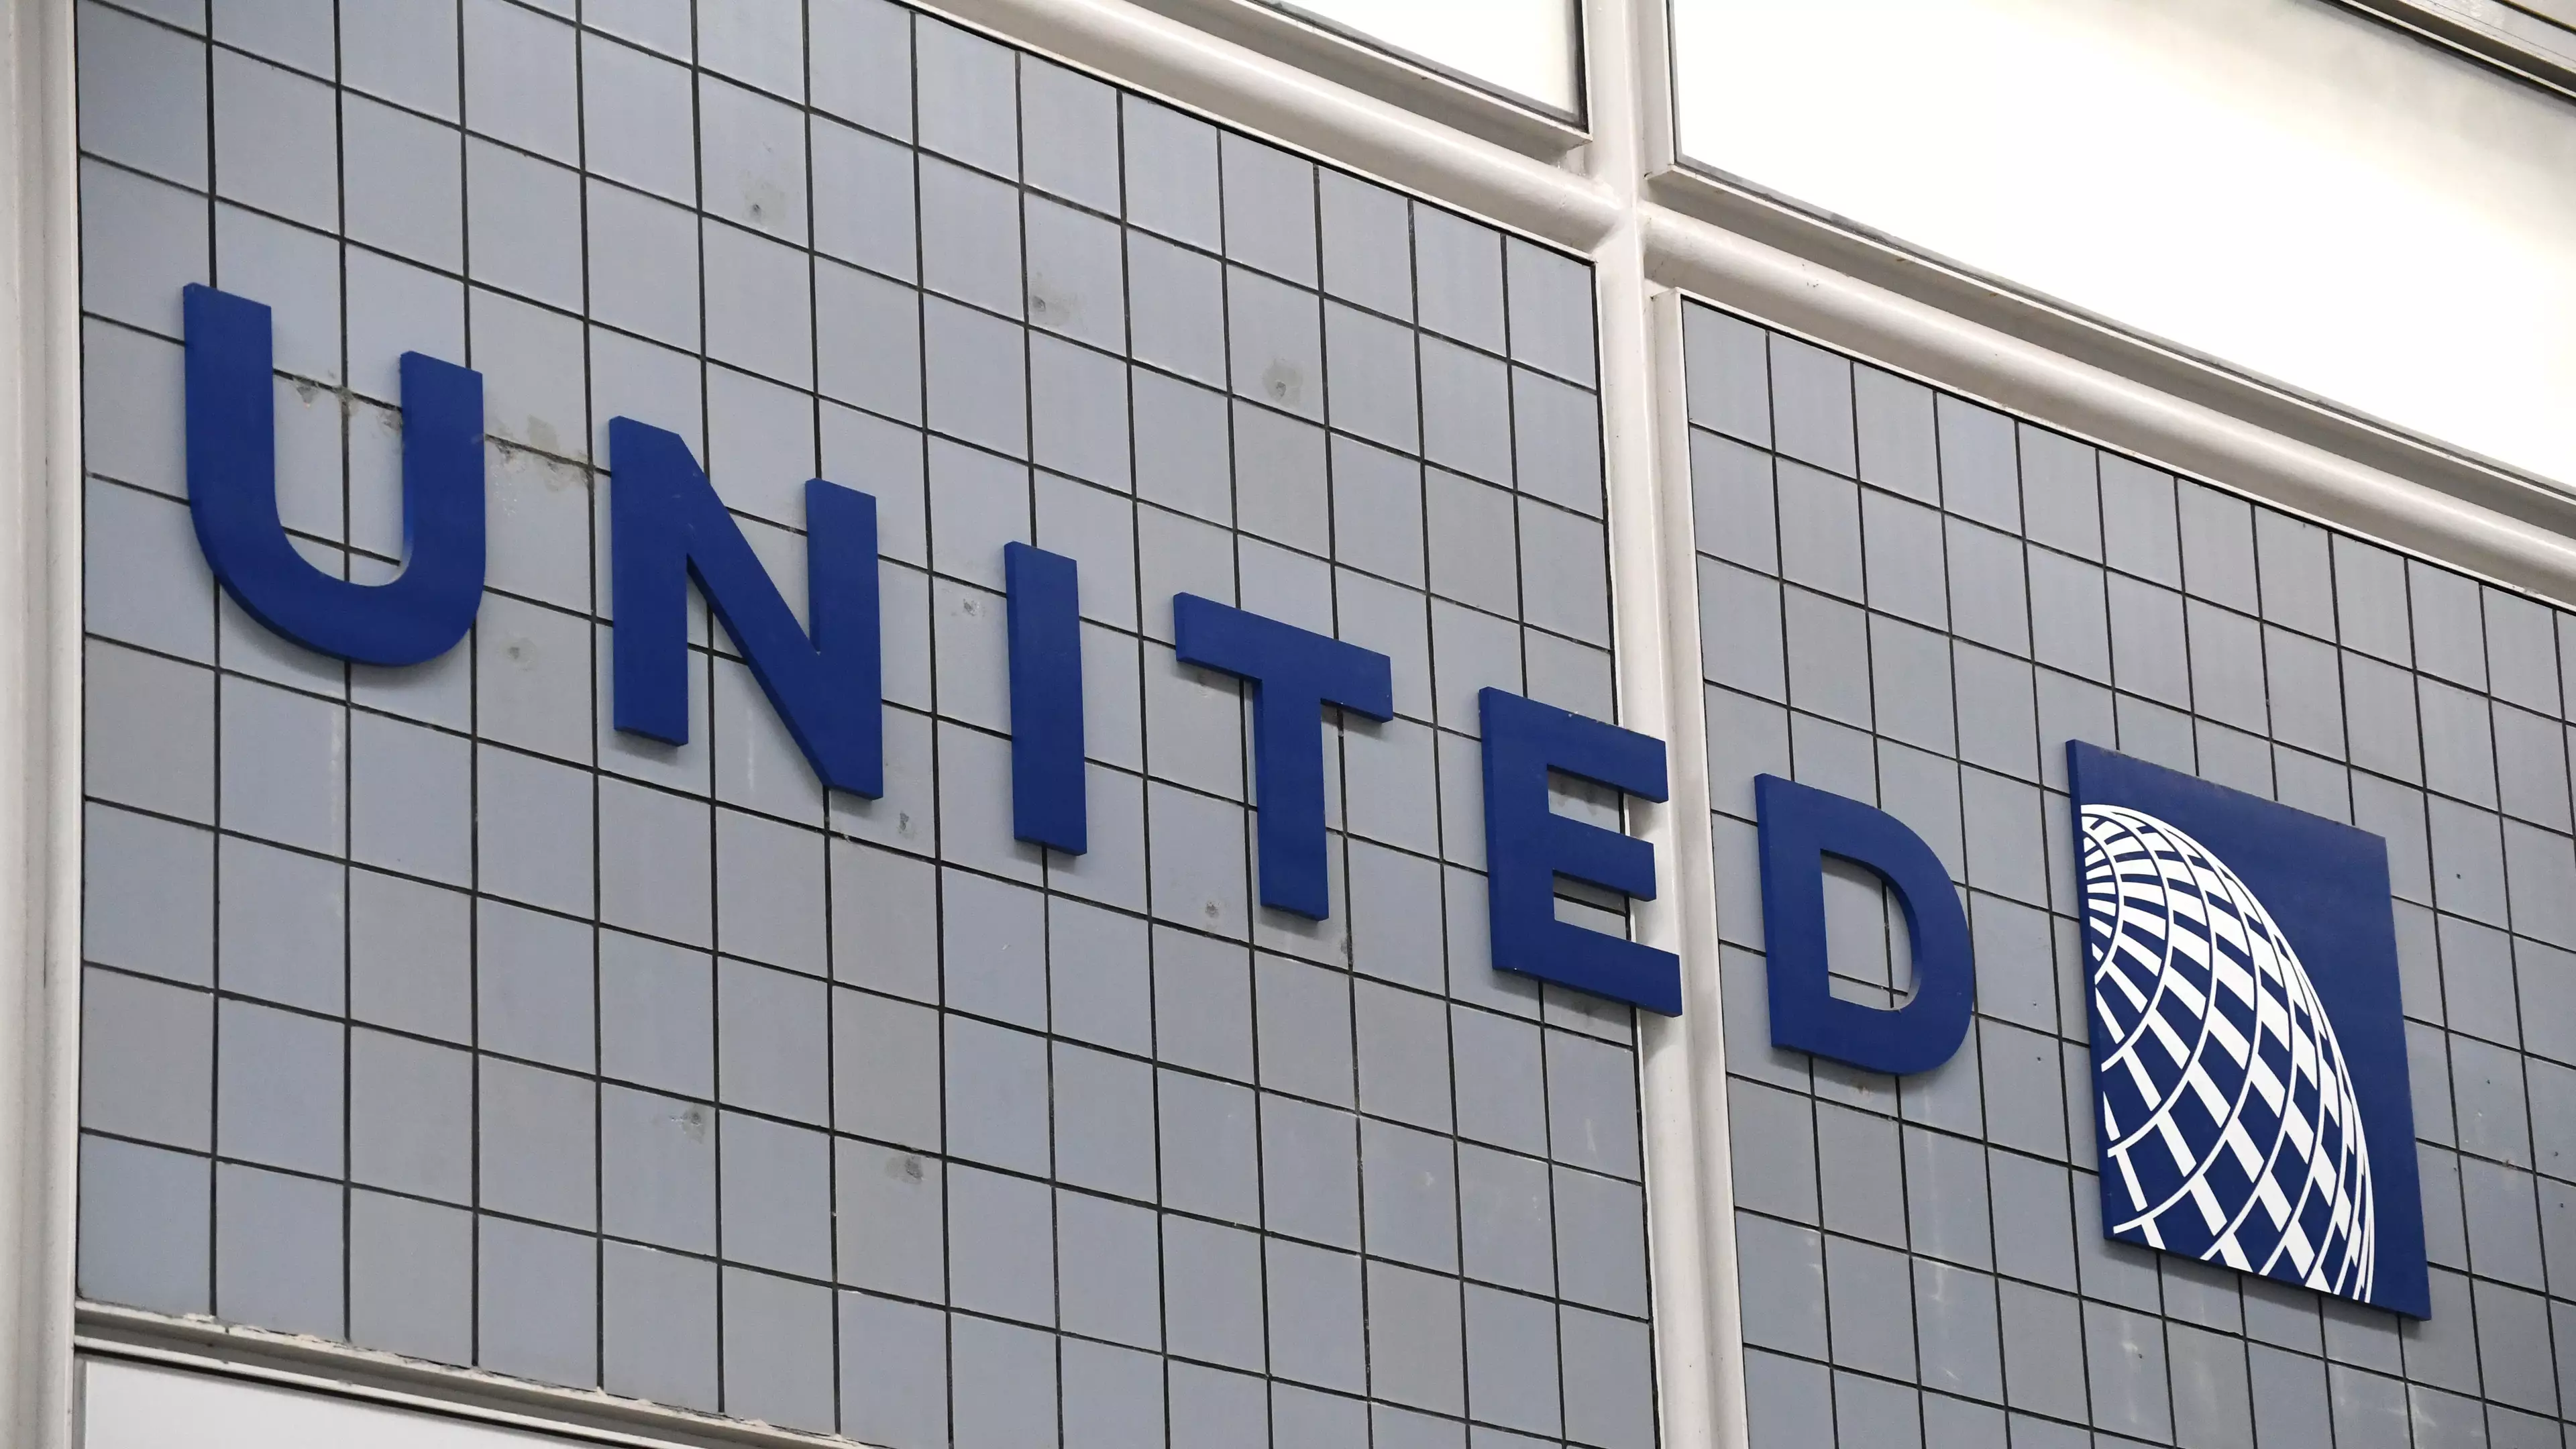 Couple Flying To Their Own Wedding Removed From United Airlines Flight